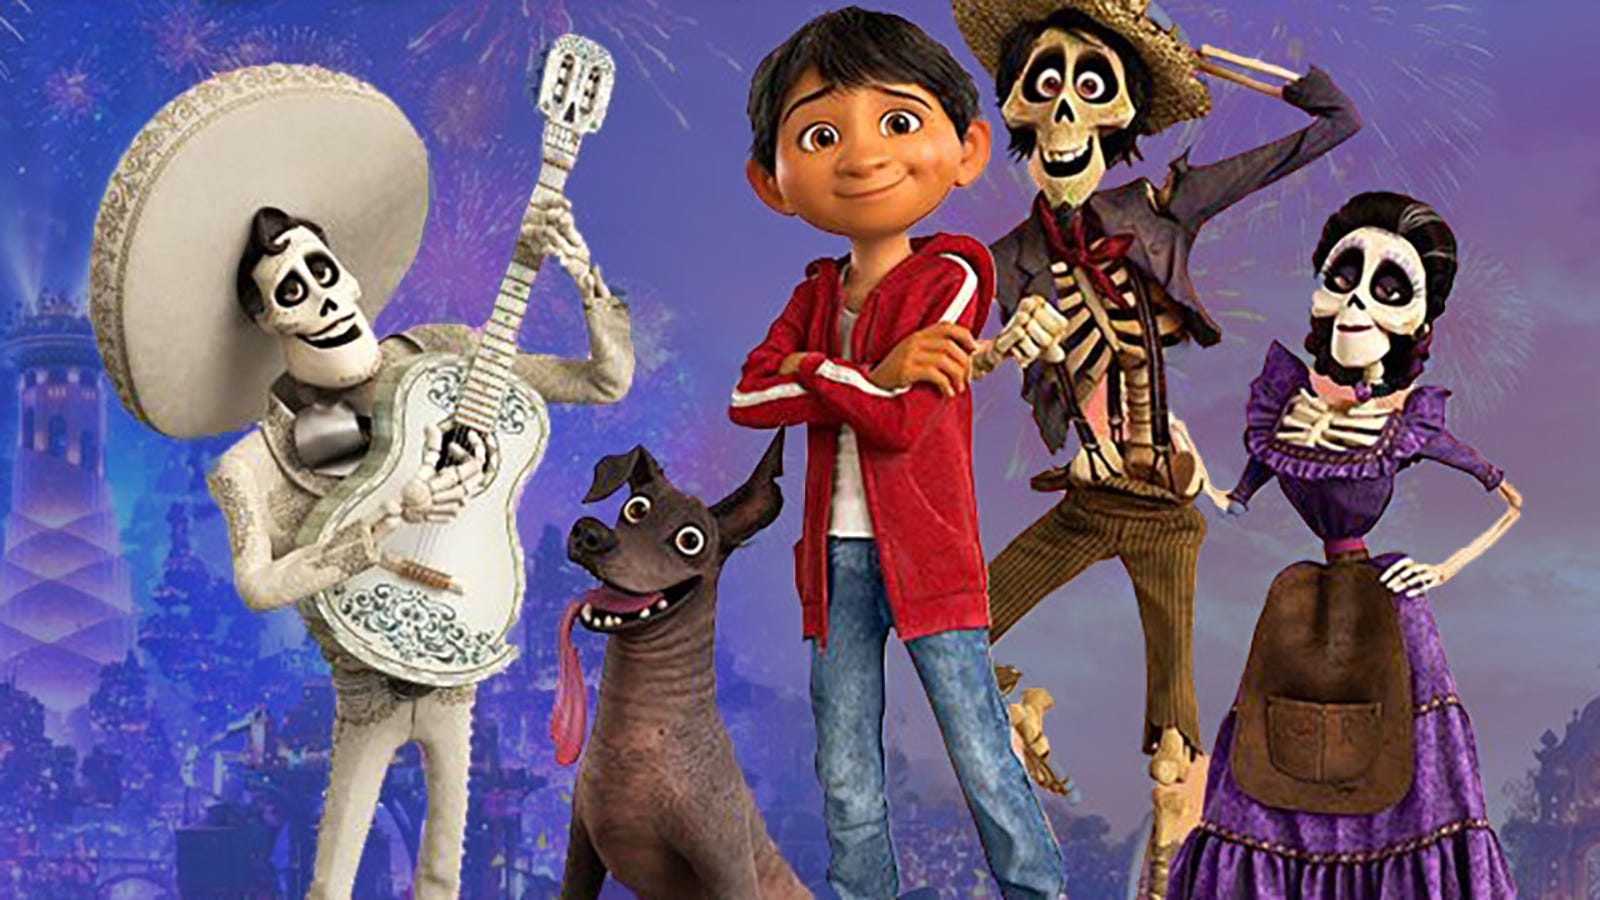 Four Lessons on Age and Wisdom from Disney's Coco